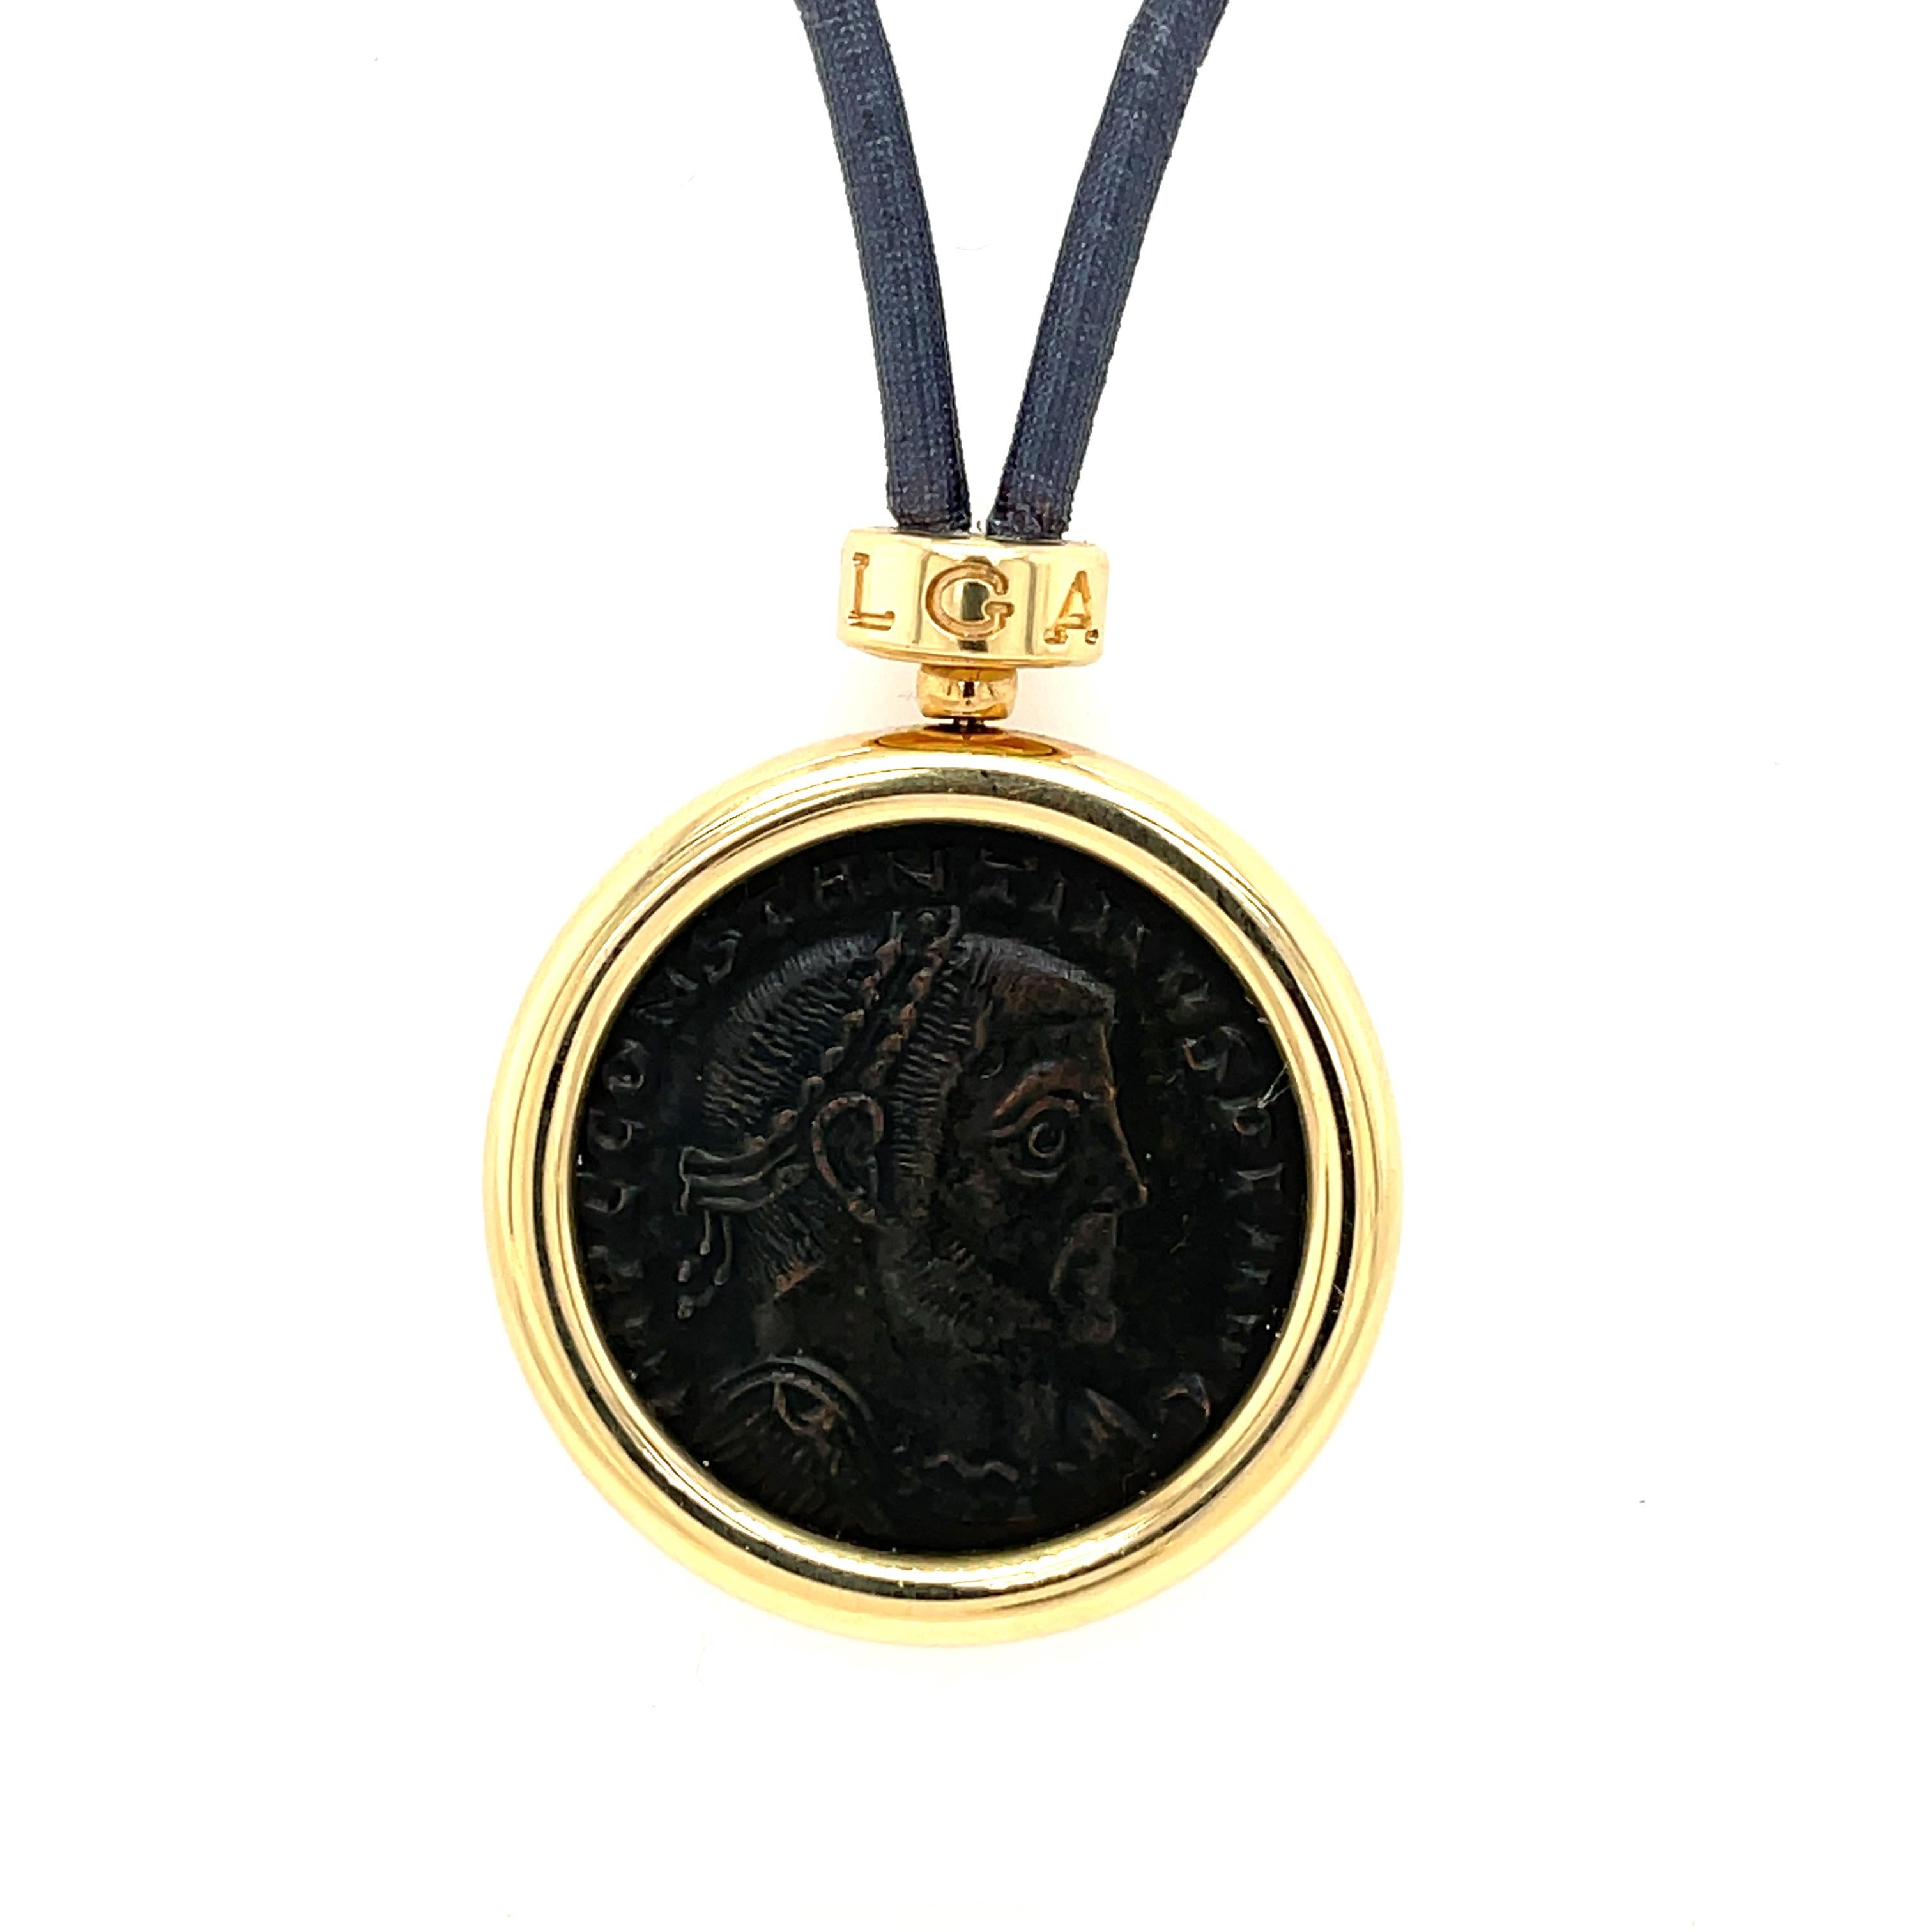 Beautiful 18k yellow gold pendant necklace, crafted by Bulgari for Monete collection, one of the most popular and valuable collection of the famous brand present also in their museum in Rome.

It features a rare ancient imperial coin:

Thessalonica